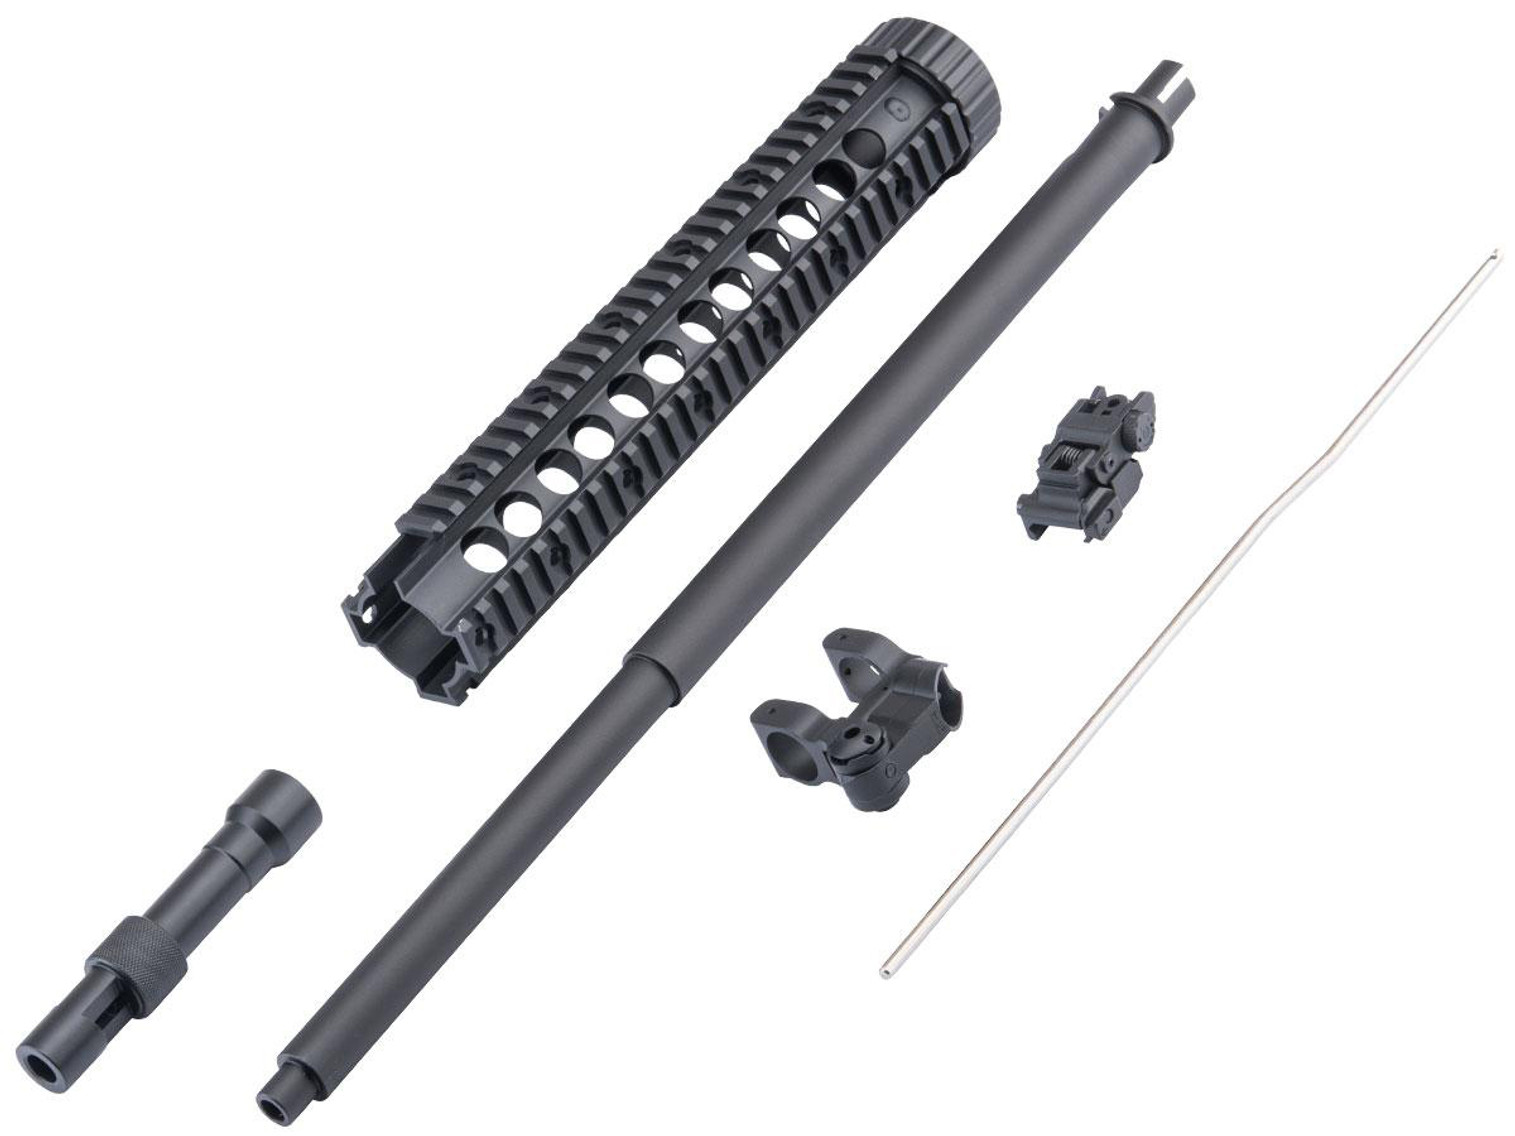 CYMA Replacement Front Assembly Kit for MK12 SPR MOD.1 AEG Airsoft Rifles (Model: non-threaded)